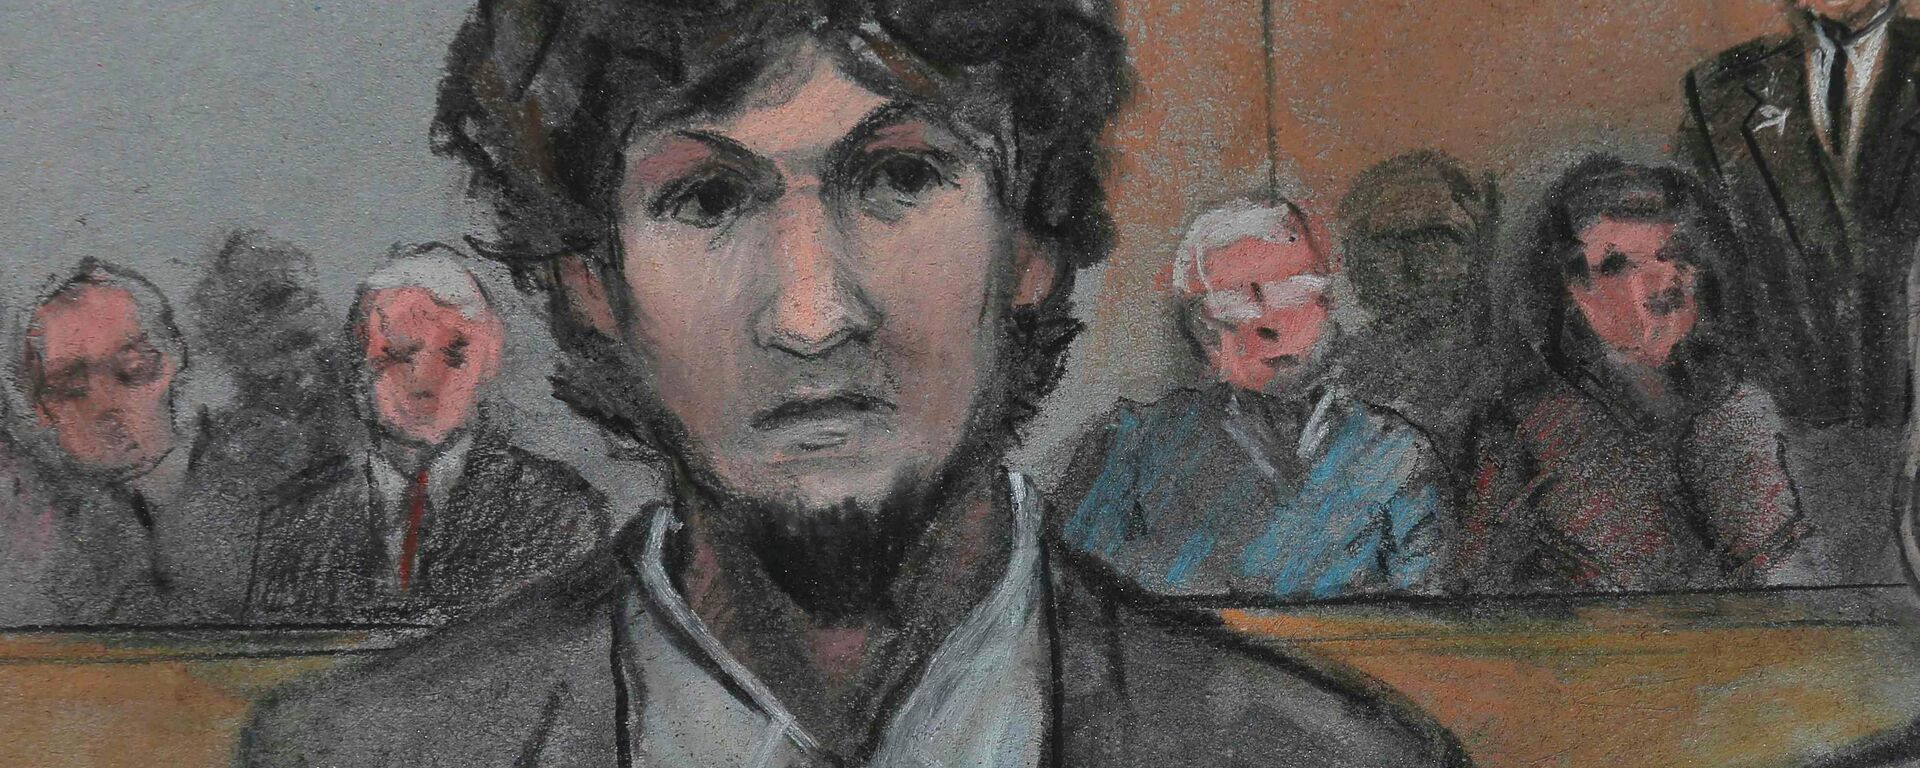 Boston Marathon bomber Dzhokhar Tsarnaev is shown in a courtroom sketch after he is sentenced at the federal courthouse in Boston, Massachusetts May 15, 2015 - Sputnik International, 1920, 31.07.2020